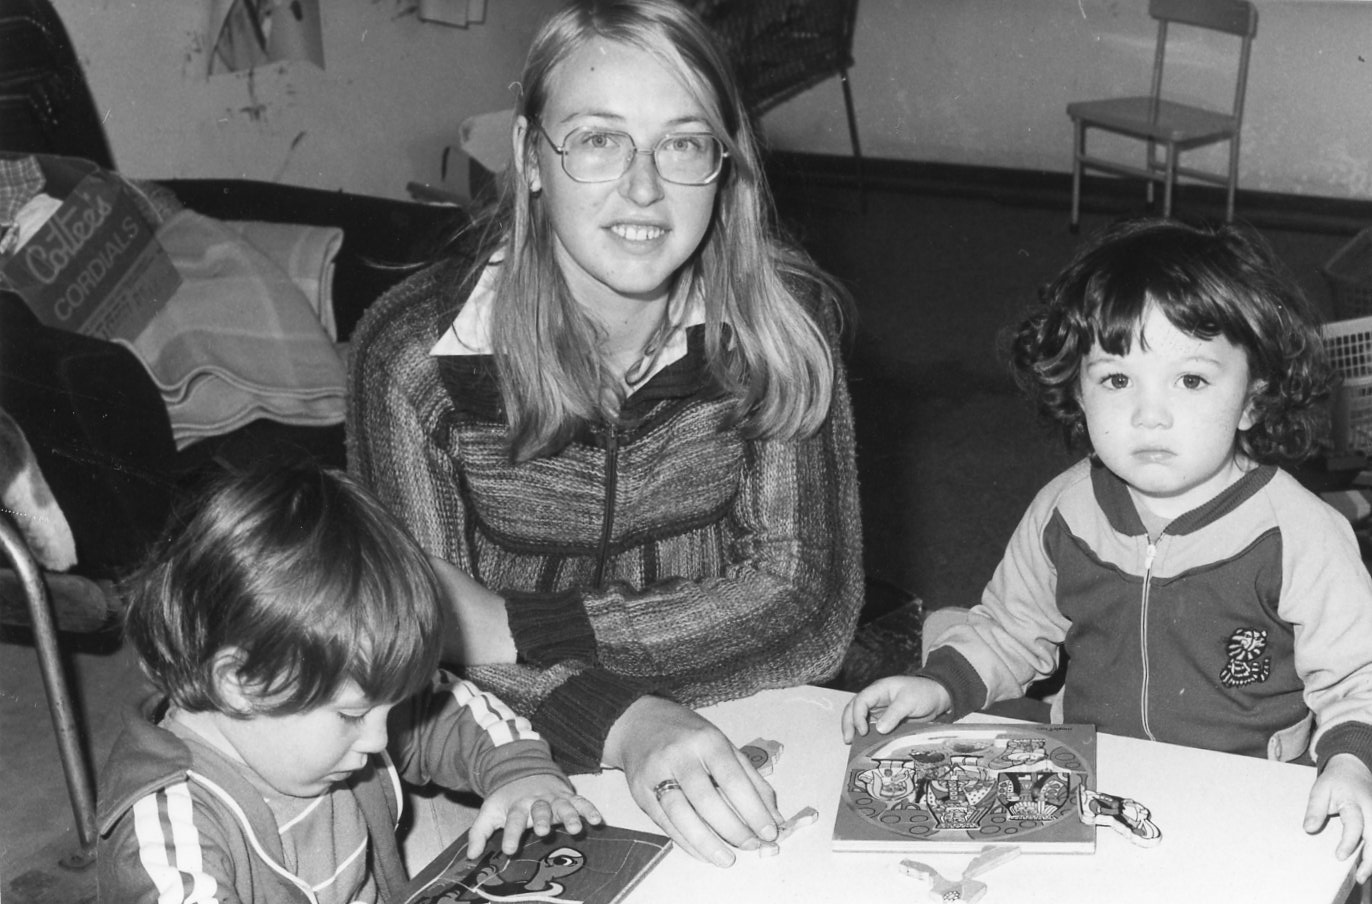 1978 - KC - Daycare With Puzzles